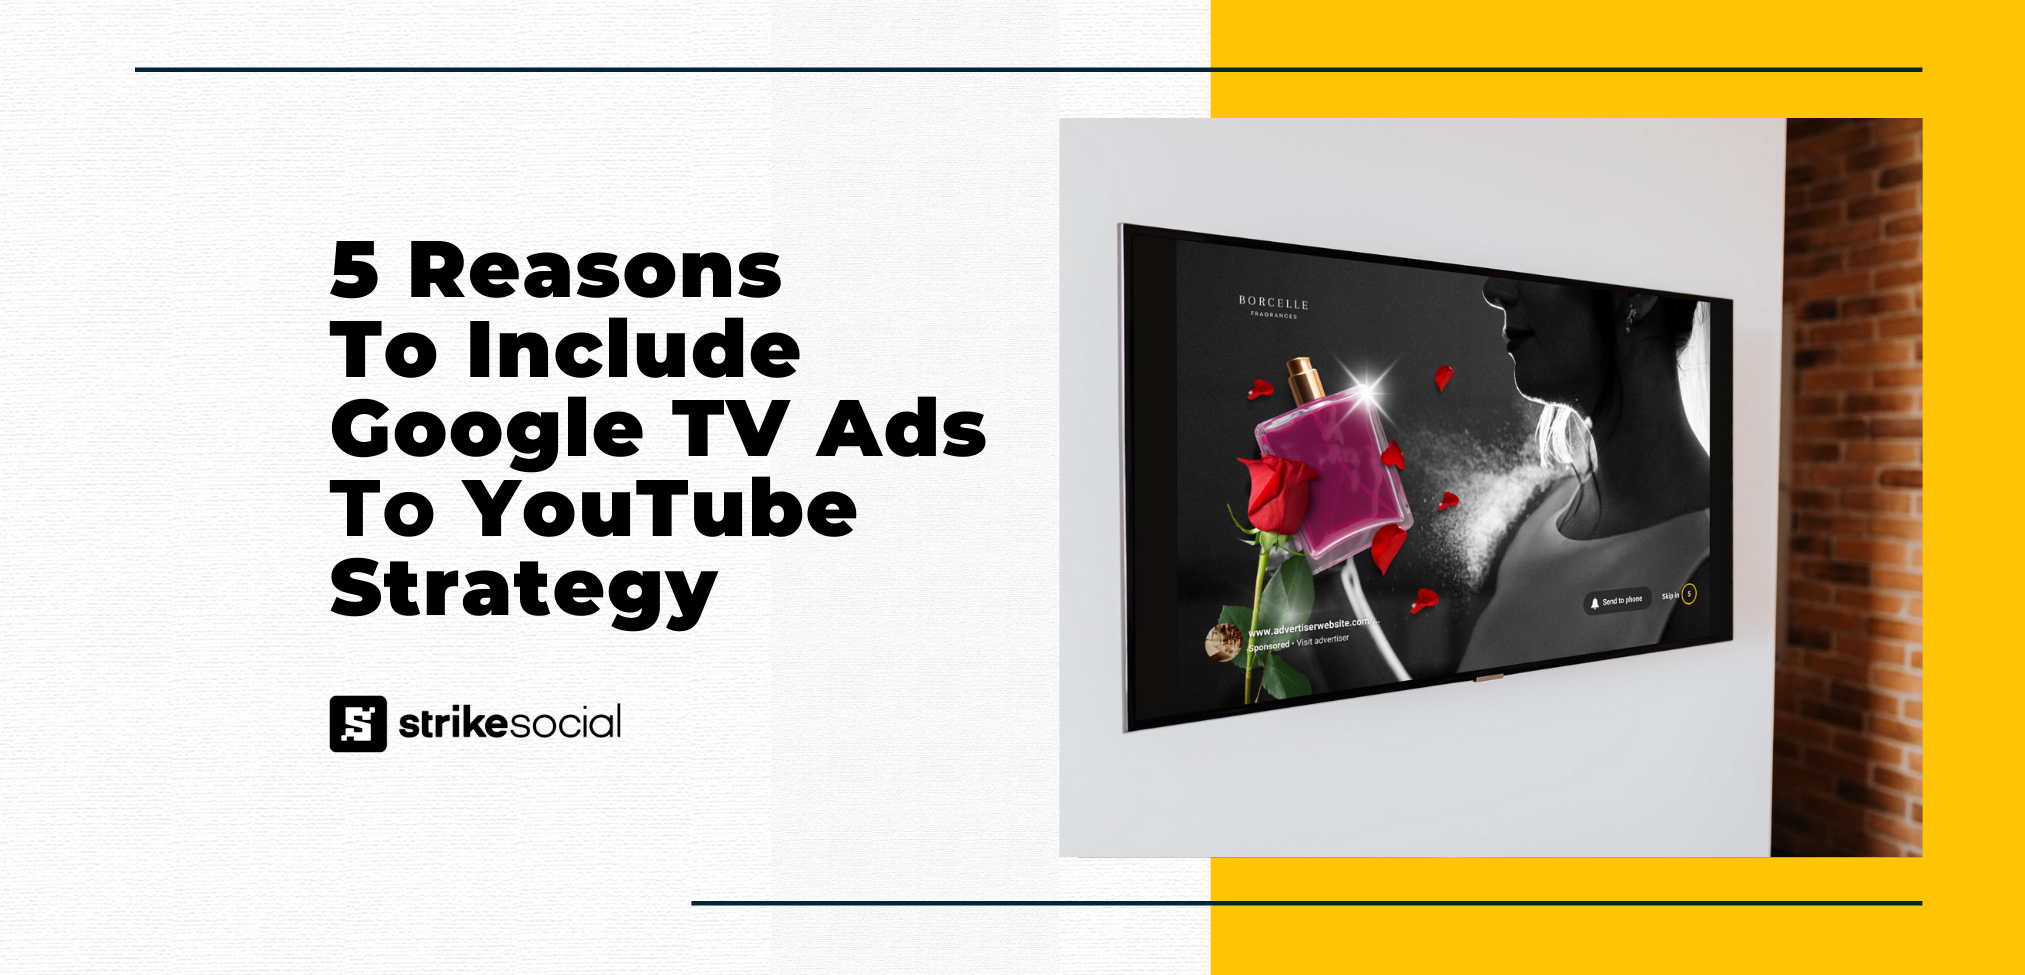 Strike Social Blog Header - 5 Reasons To Include Google TV Ads To YouTube Strategy